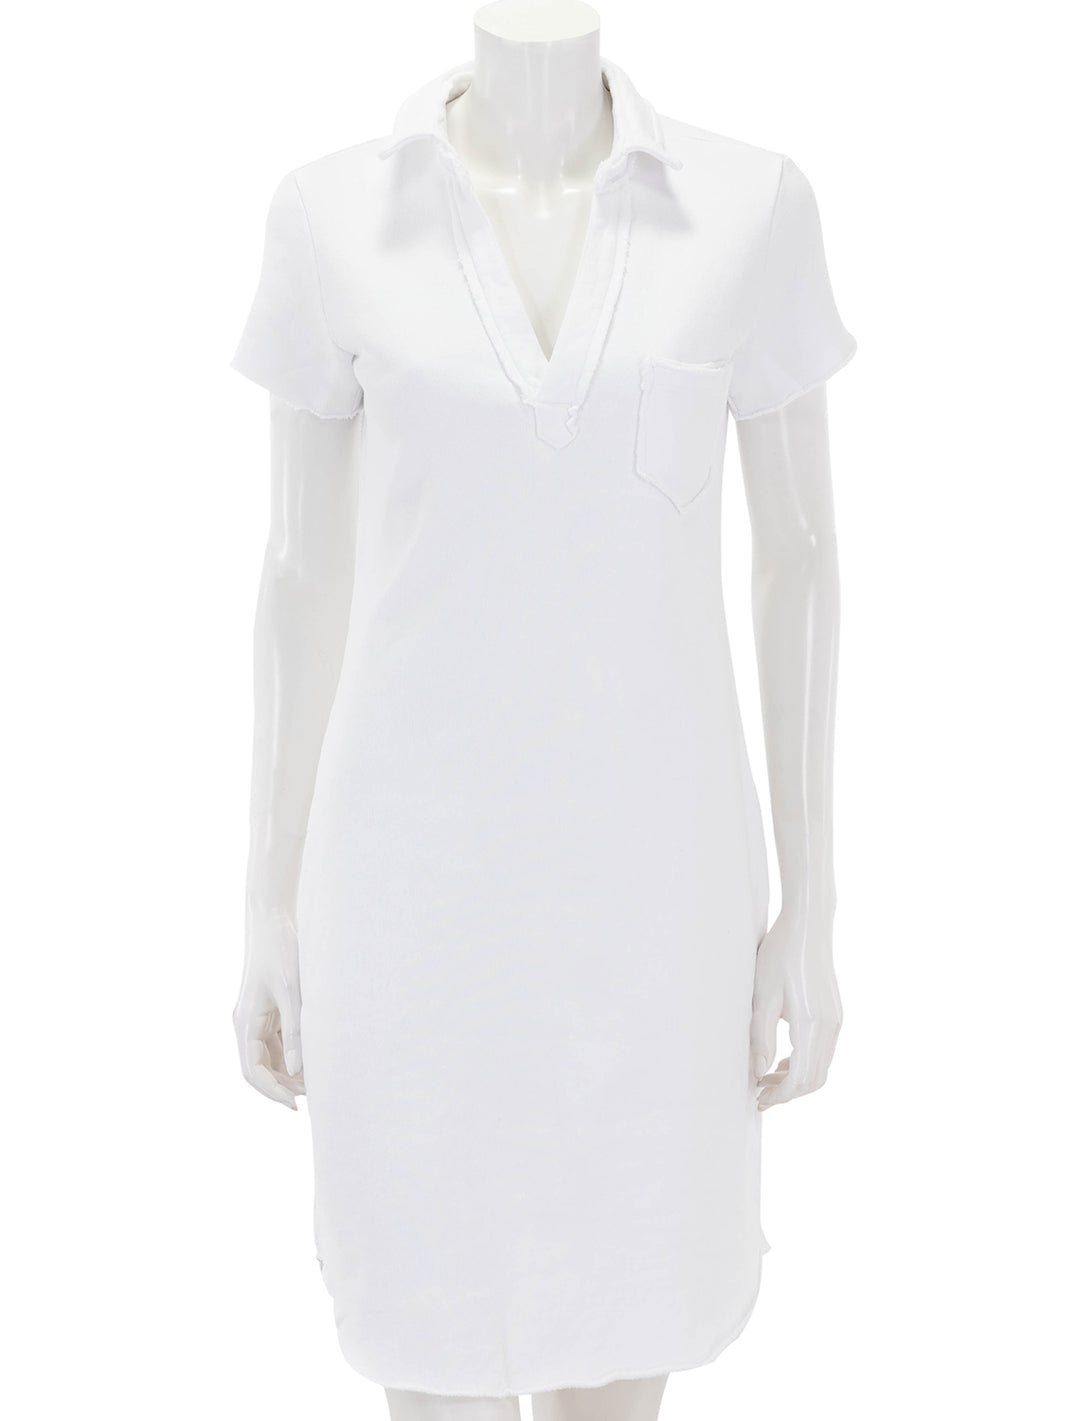 Front view of Frank & Eileen's lauren polo dress in white.